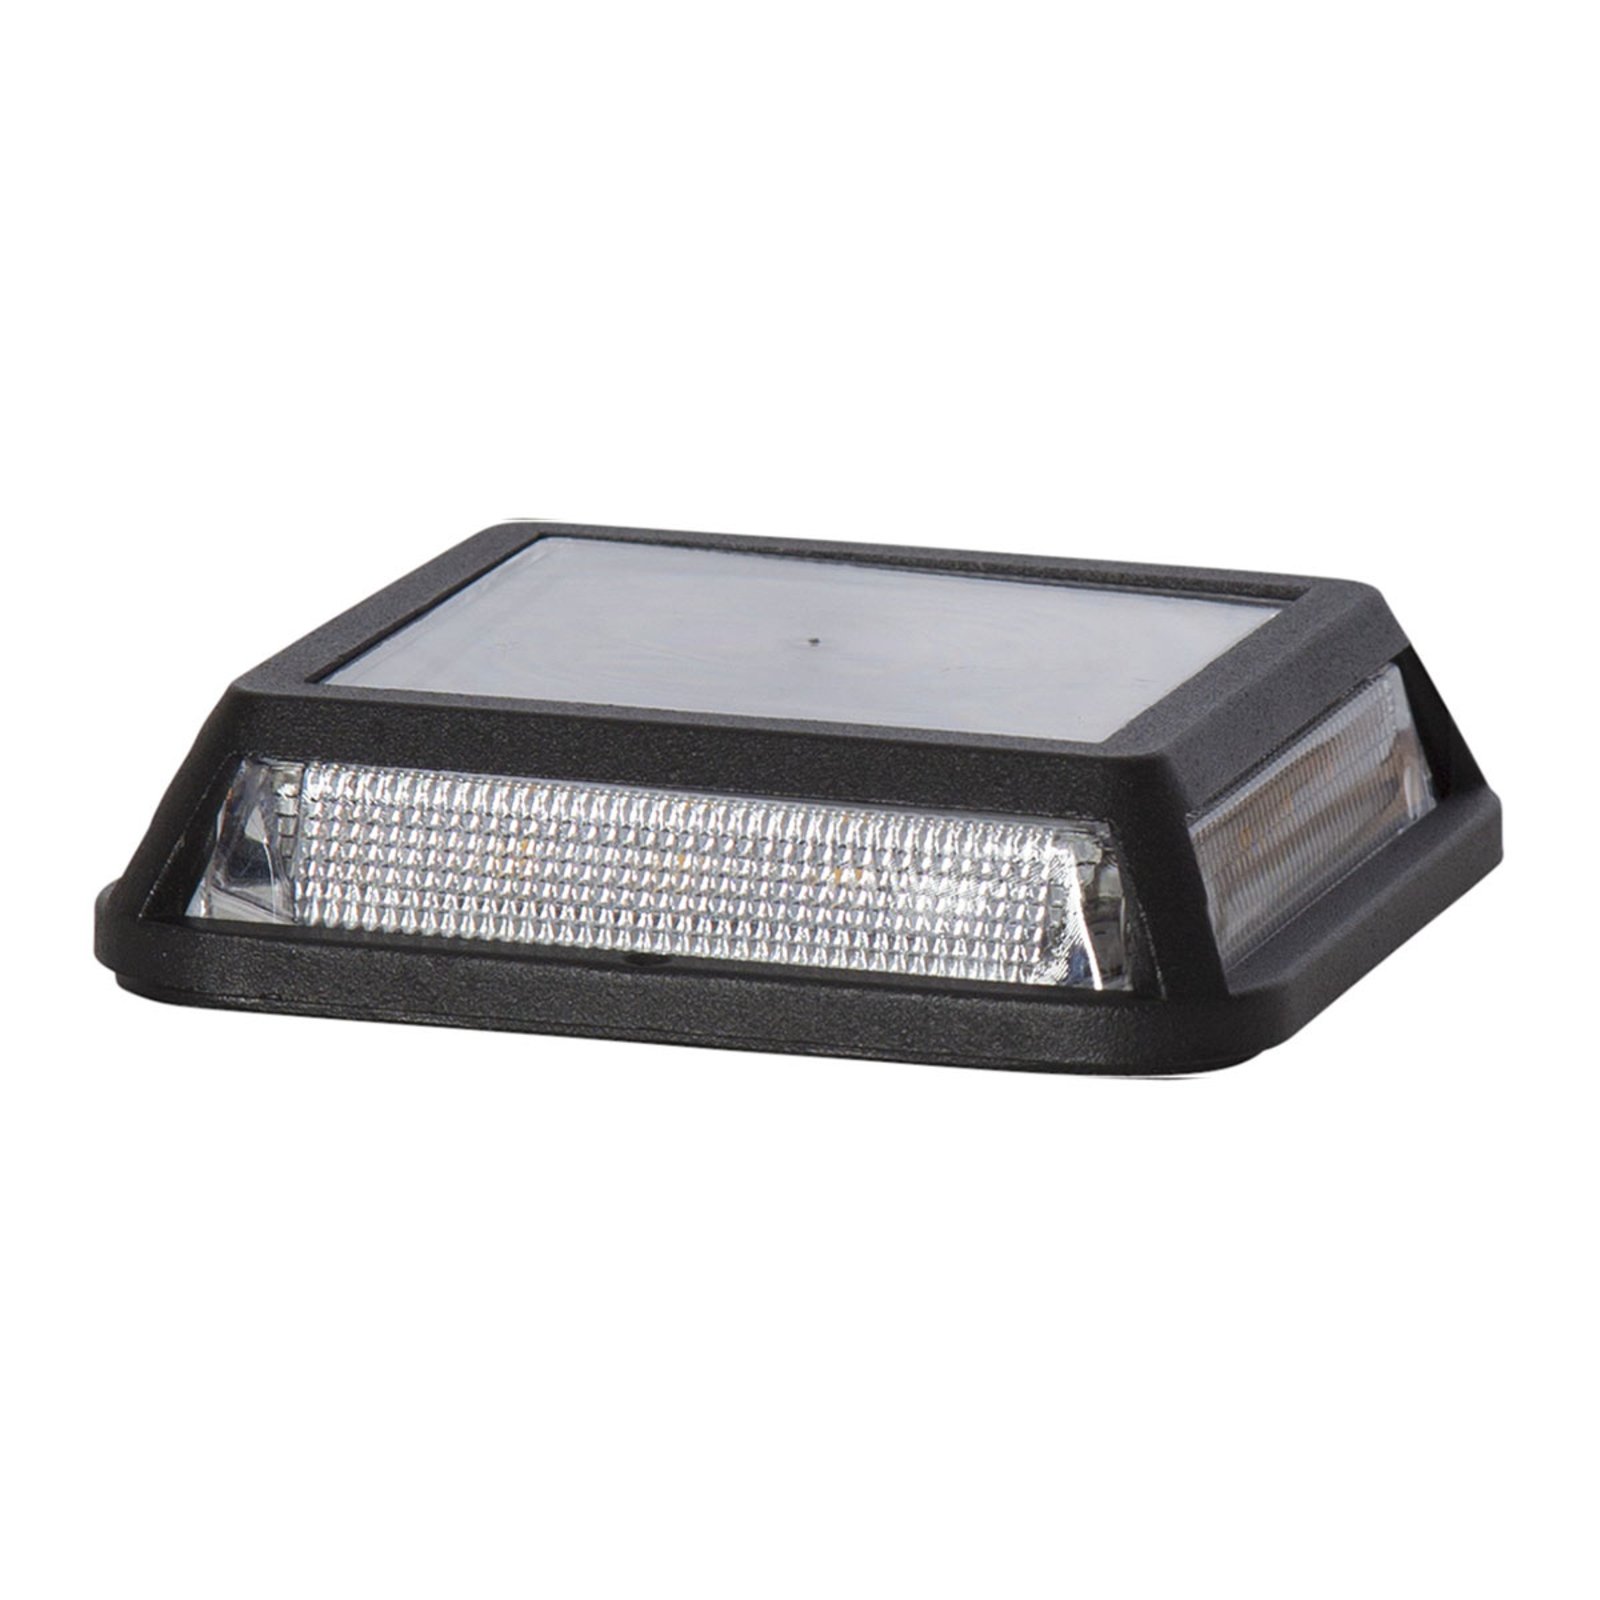 Driveway LED solar light, load of up to 3,000 kg